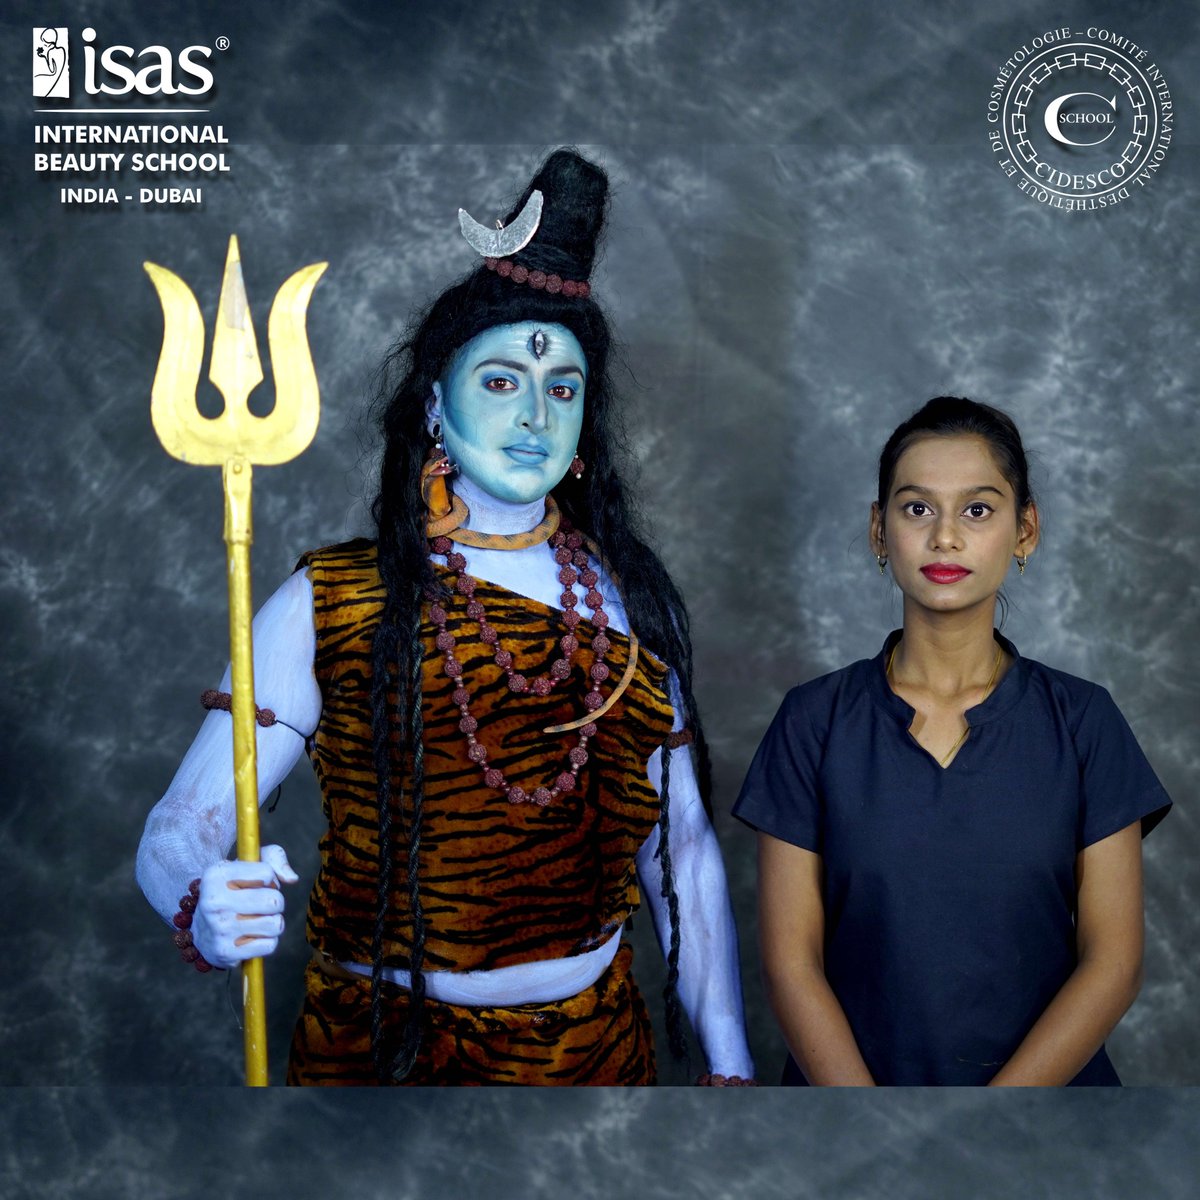 Beautiful CIDESCO Portfolio Film & Video look of Lord Shiva created by student Neha Ghule at ISAS Beauty School, Ahmednagar.
To know more call us at +91589 85007 
isas.in
#isas #cidescointernational #isasbeautyschool #filmandvideo #makeup #makeupartist